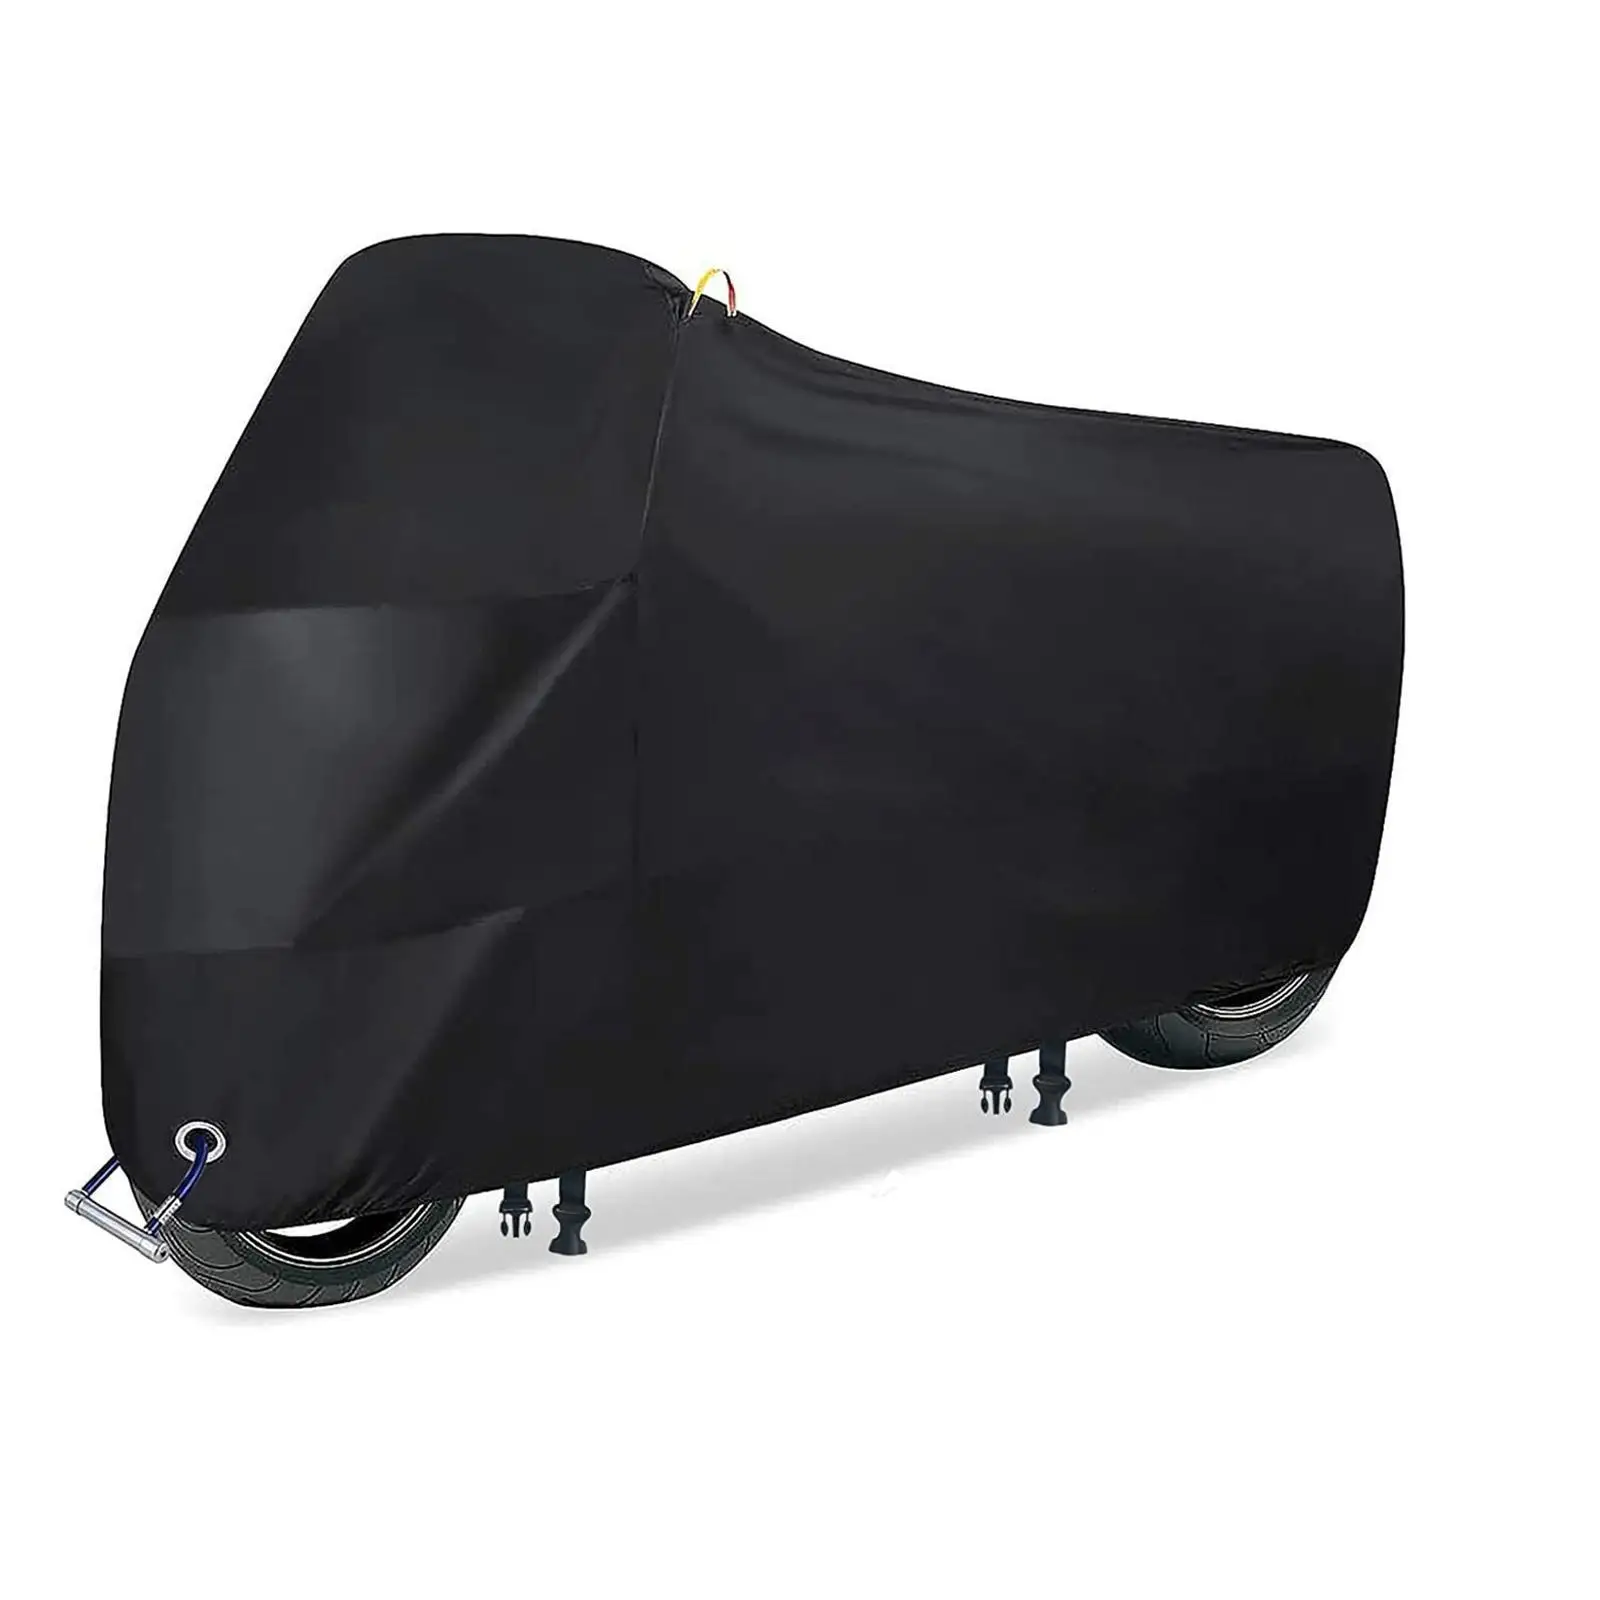 Motorcycle Cover Motorbike Waterproof Dustproof Cover 200x70x110cm Practical Accessories with 2 Buckle Vehicle Cover Durable